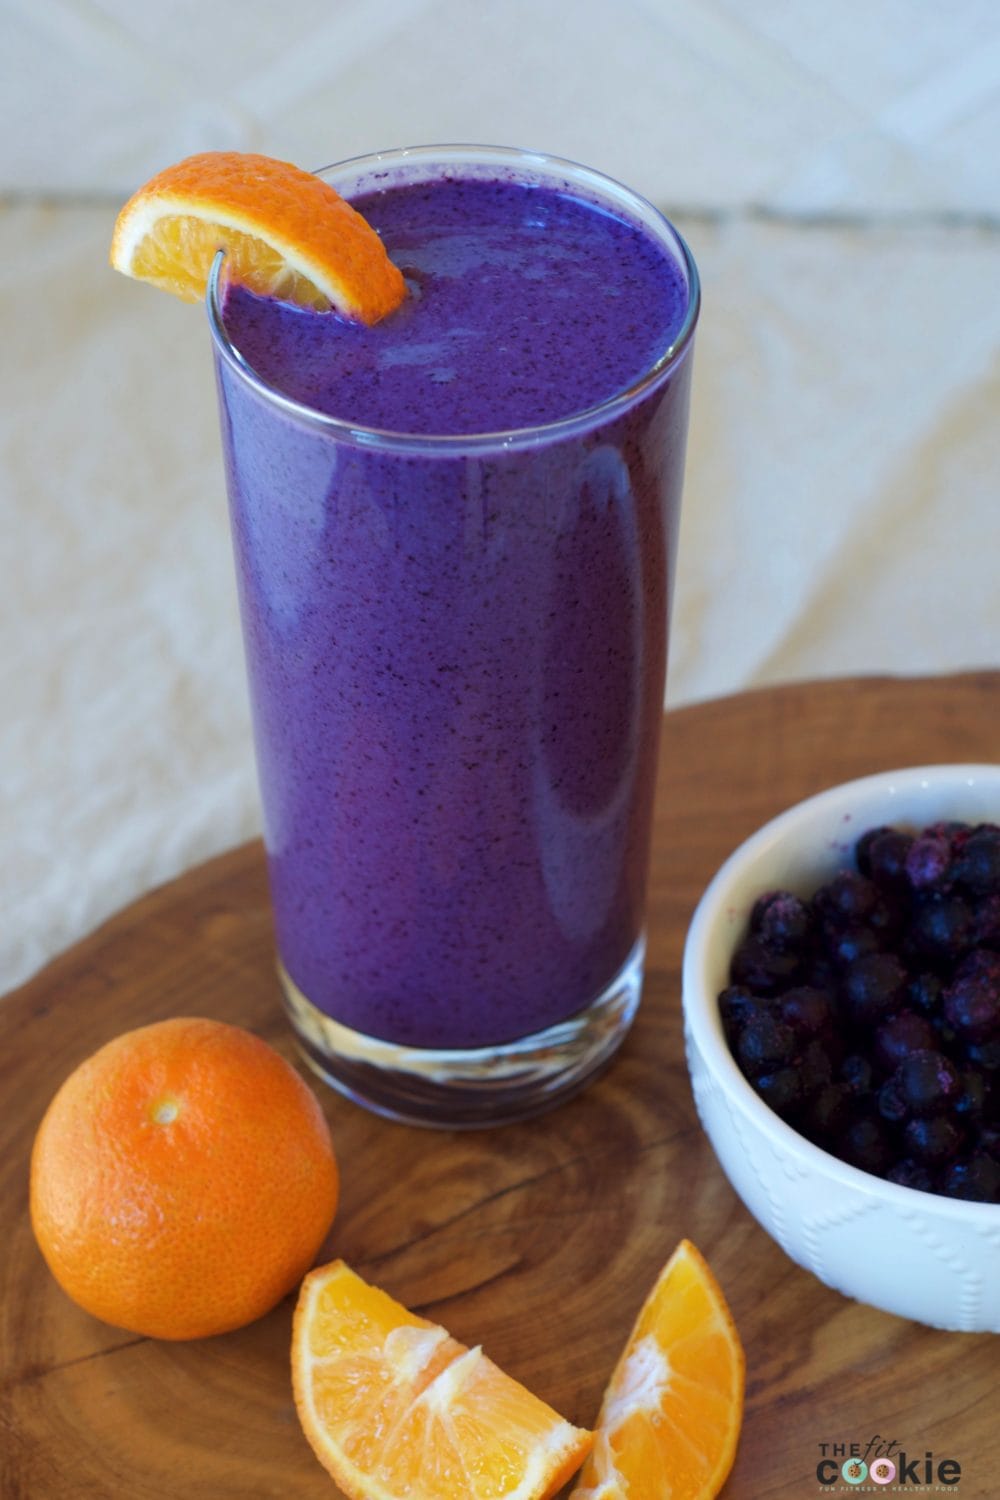 Looking for a cool and quick summer snack? Make this Creamy Blueberry Orange Smoothie - it's even great for breakfast and it's naturally paleo and vegan - @thefitcookie #recipe #vegan #glutenfree